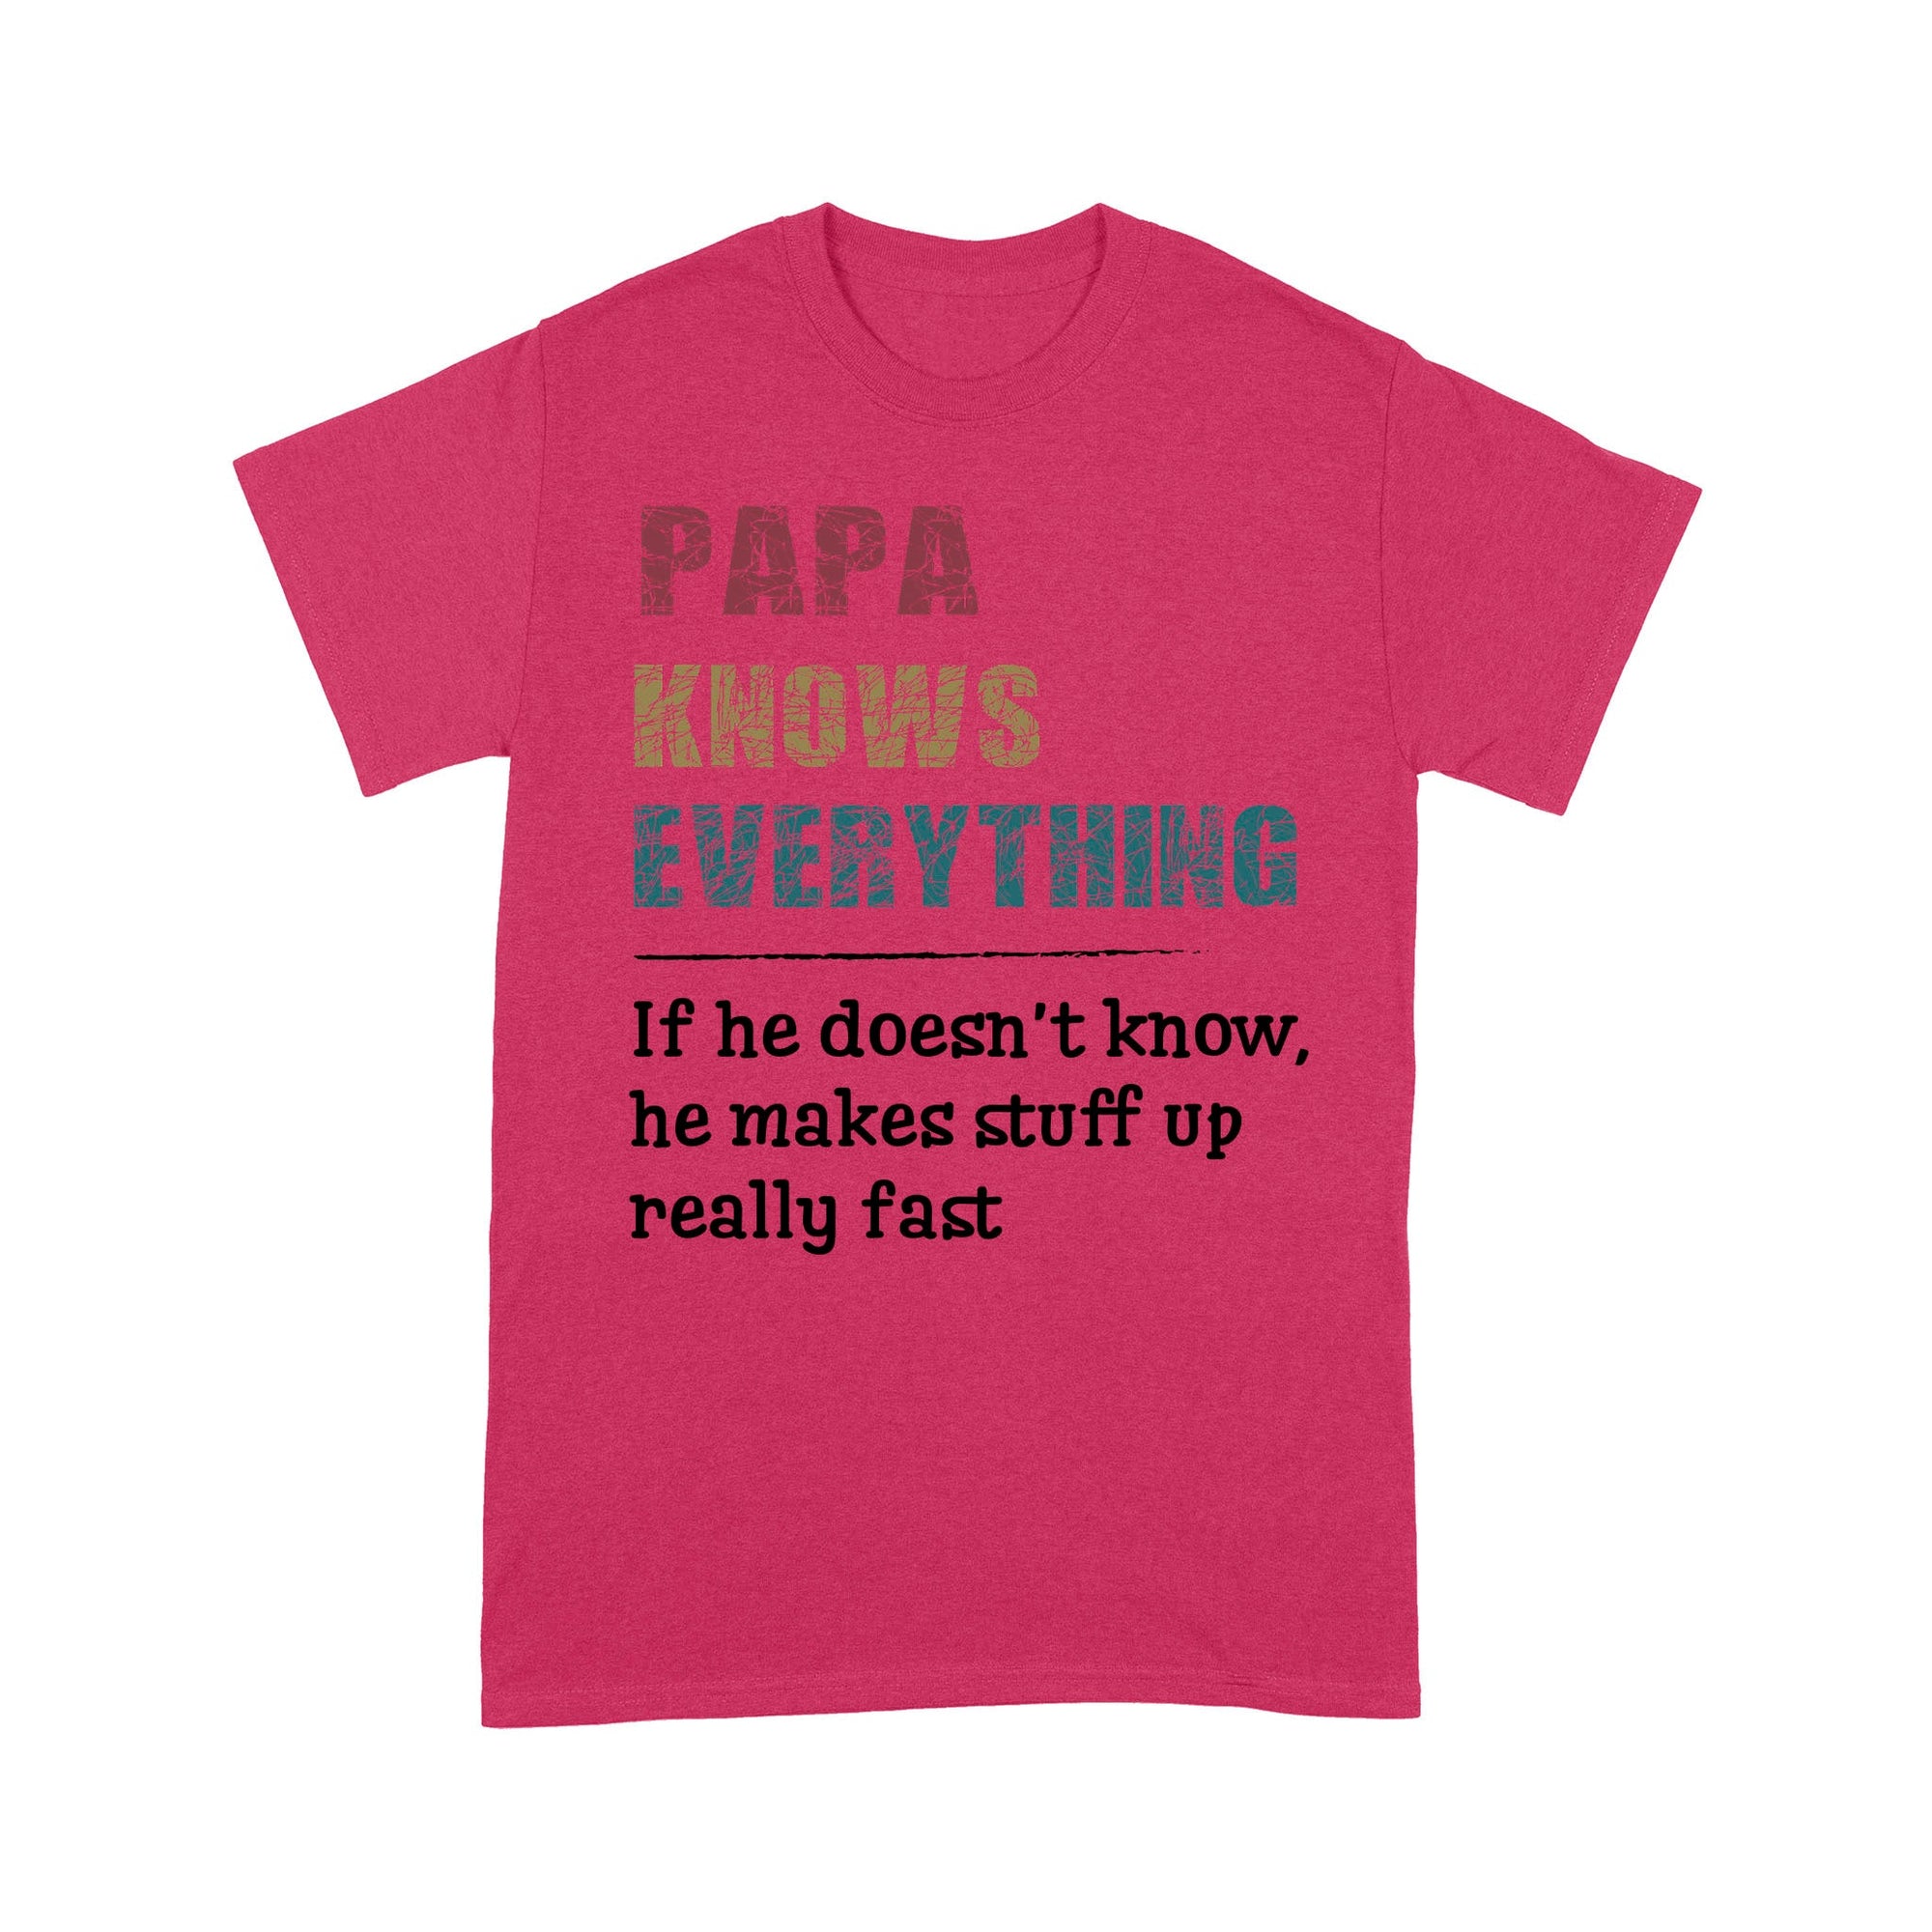 Papa knows everything and if he doesn't he can make up something real fast fathers day gift ideas Standard T-Shirt